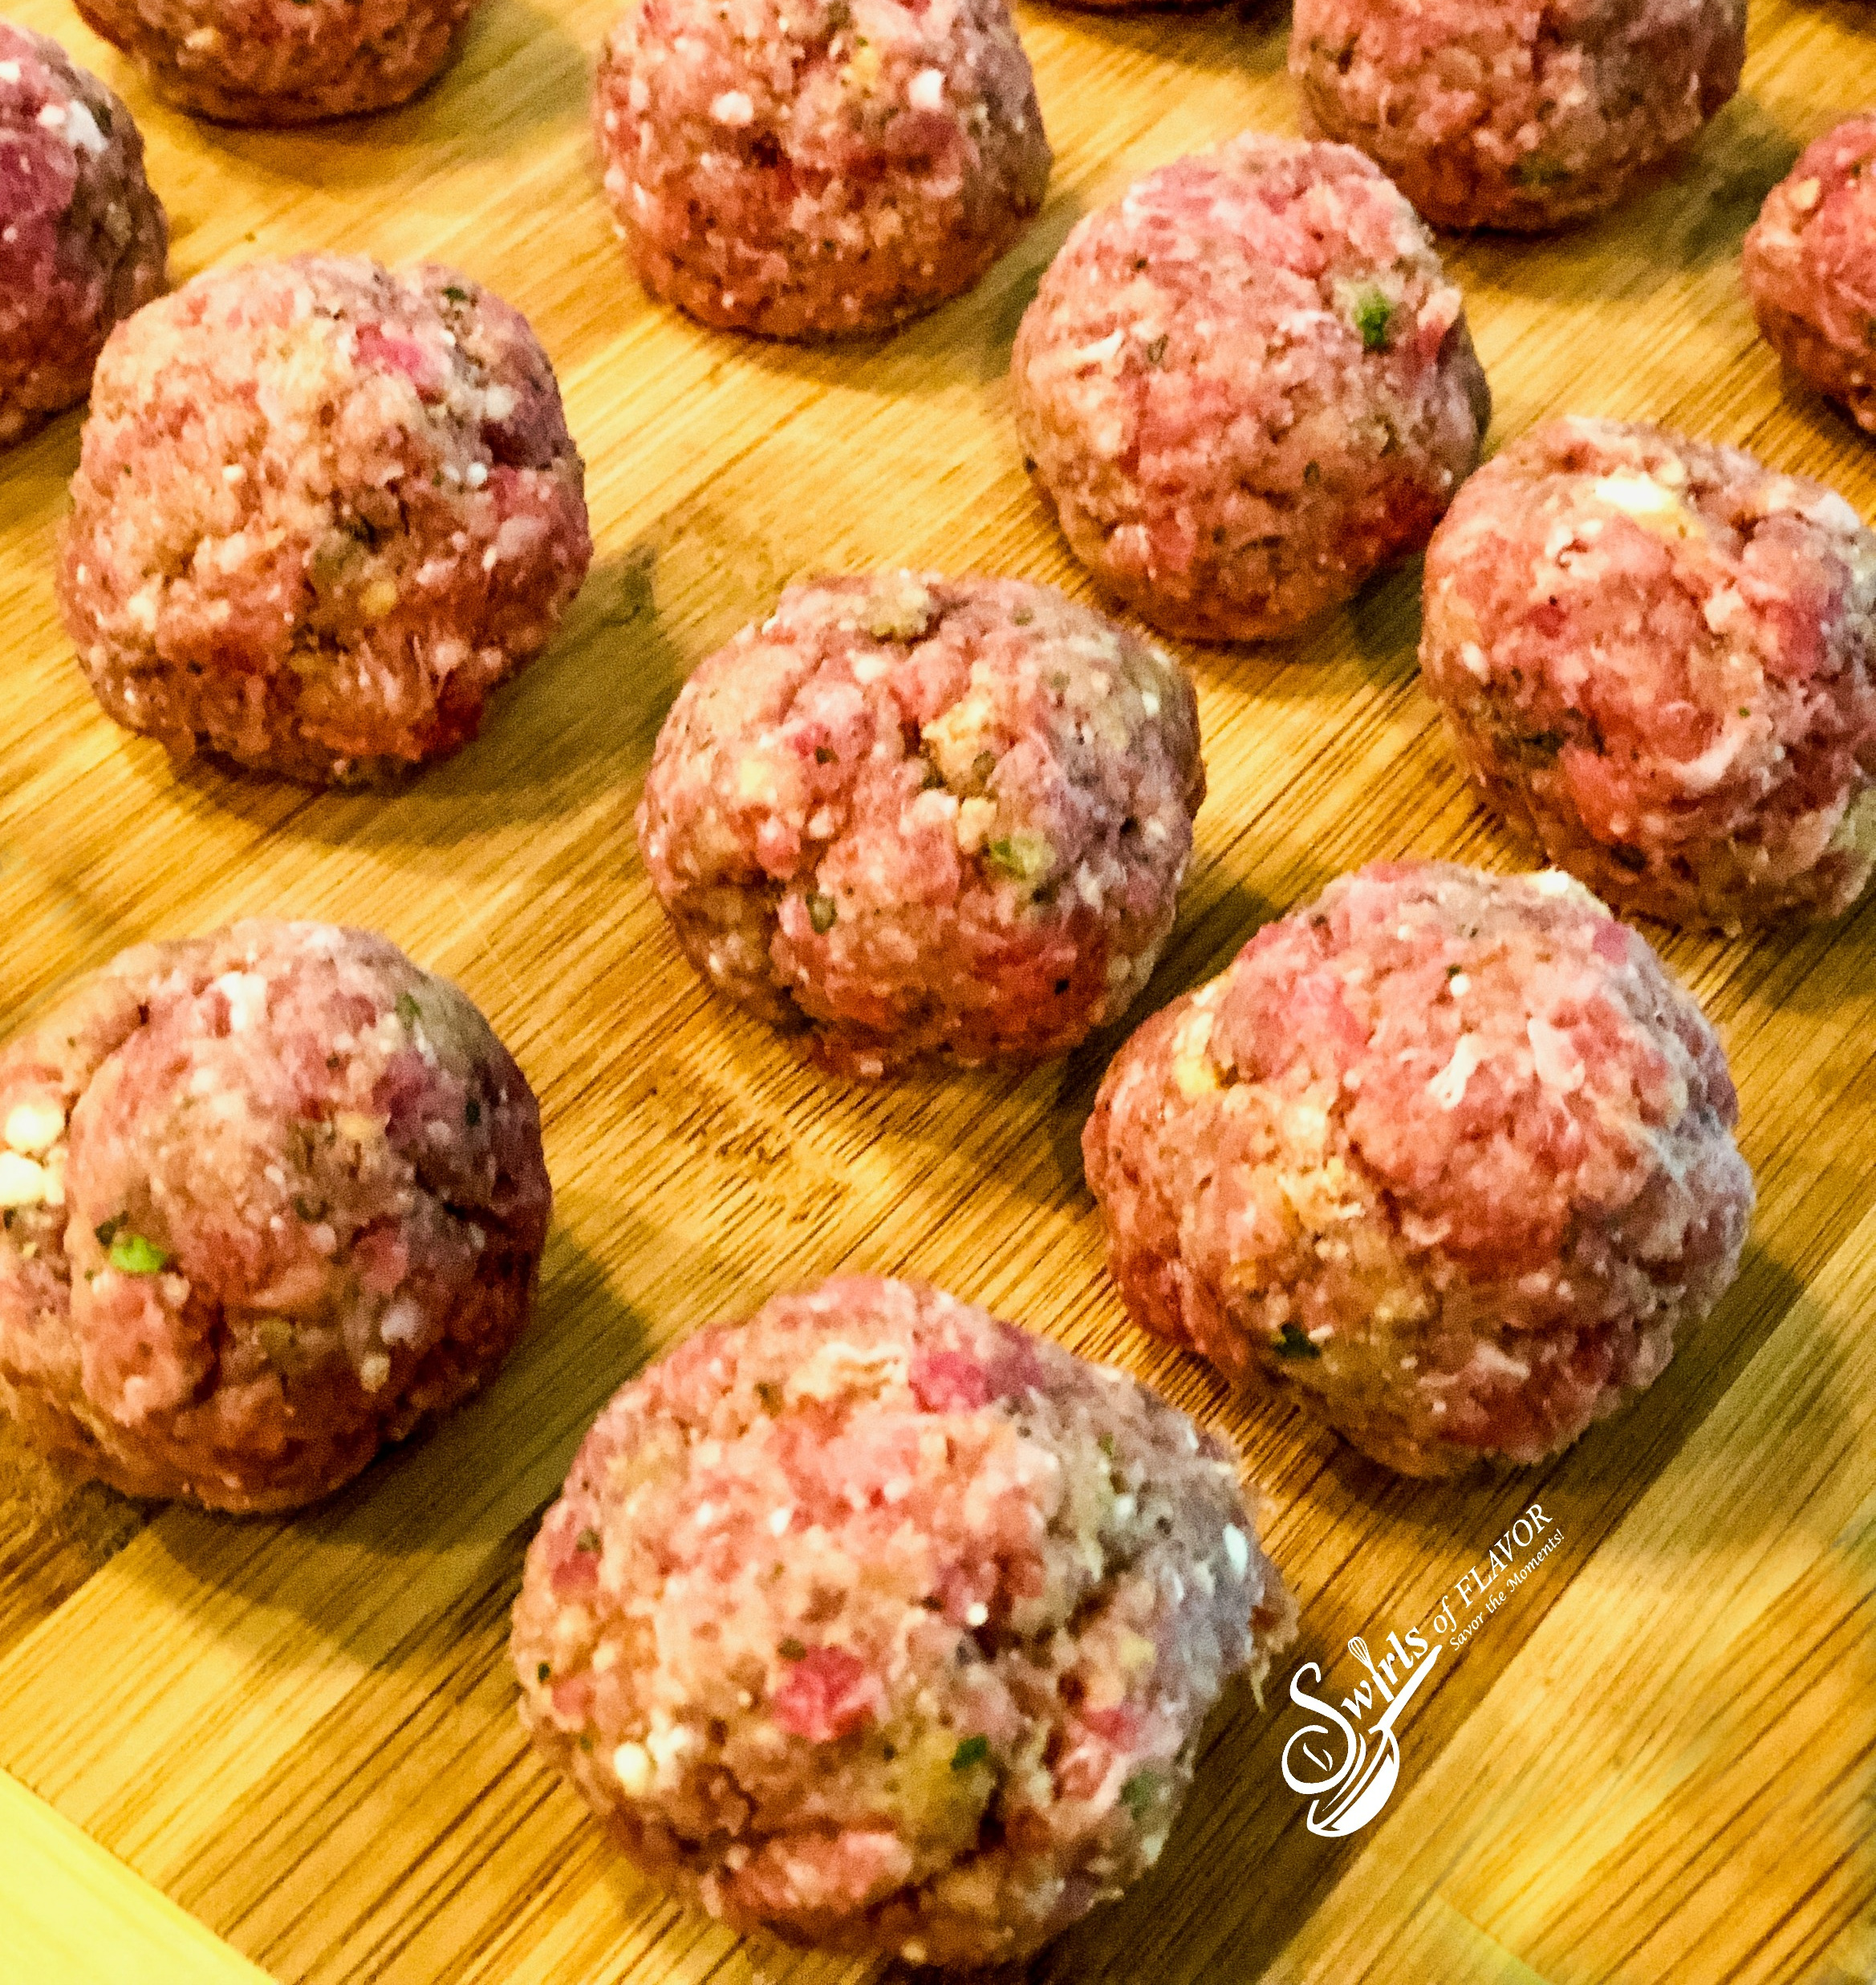 uncooked meatballs on wooden surface